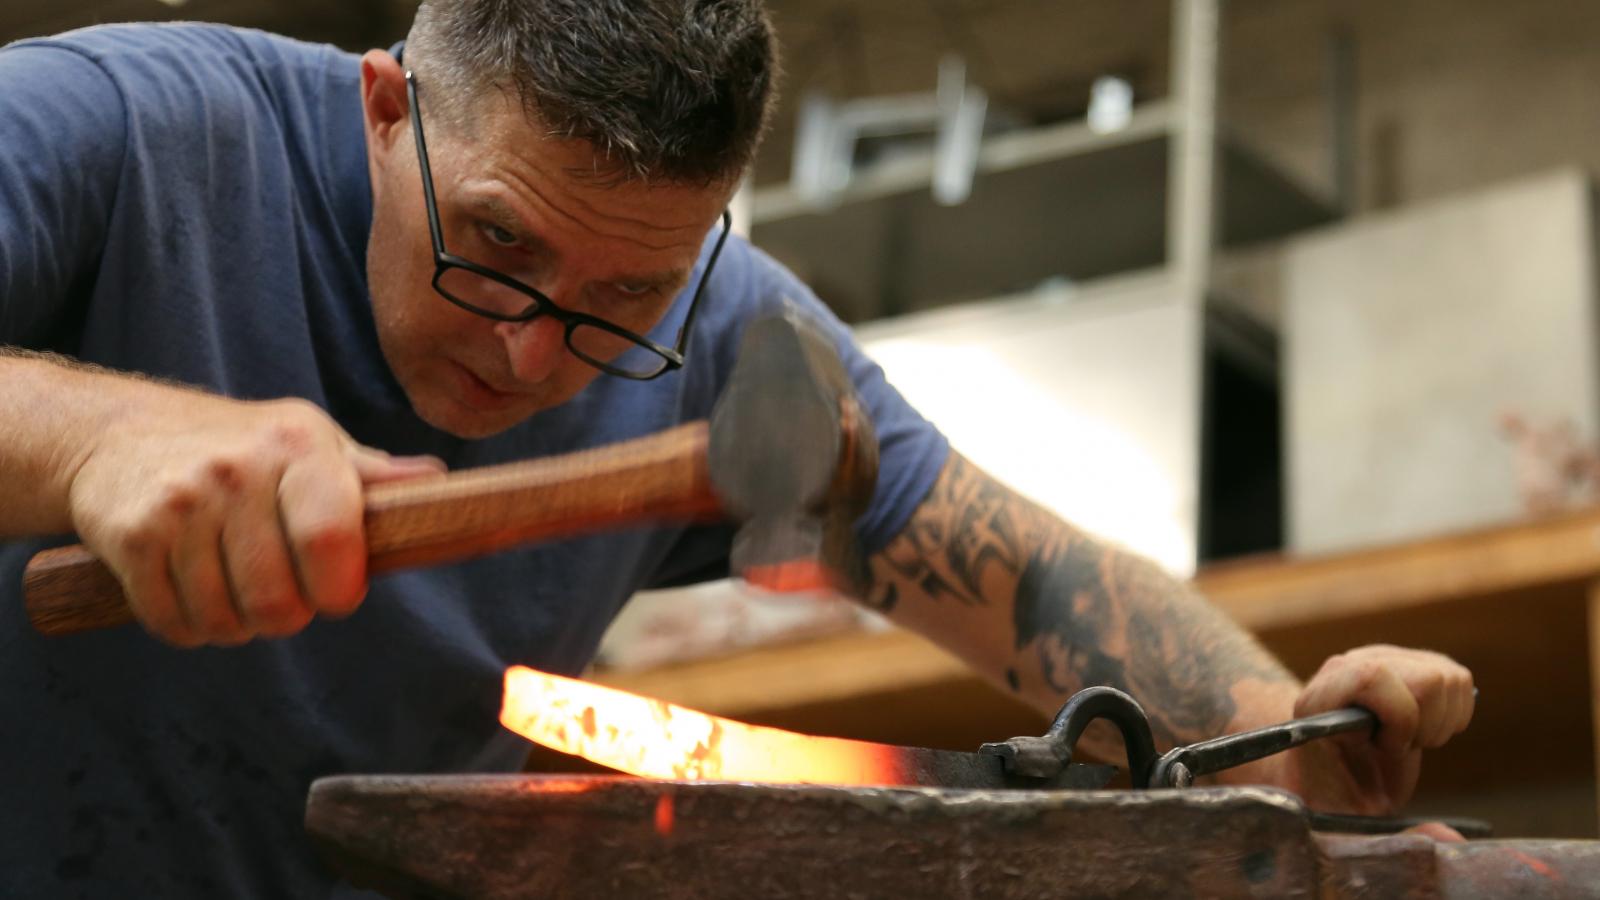 Man looks closely at a blade he is forging